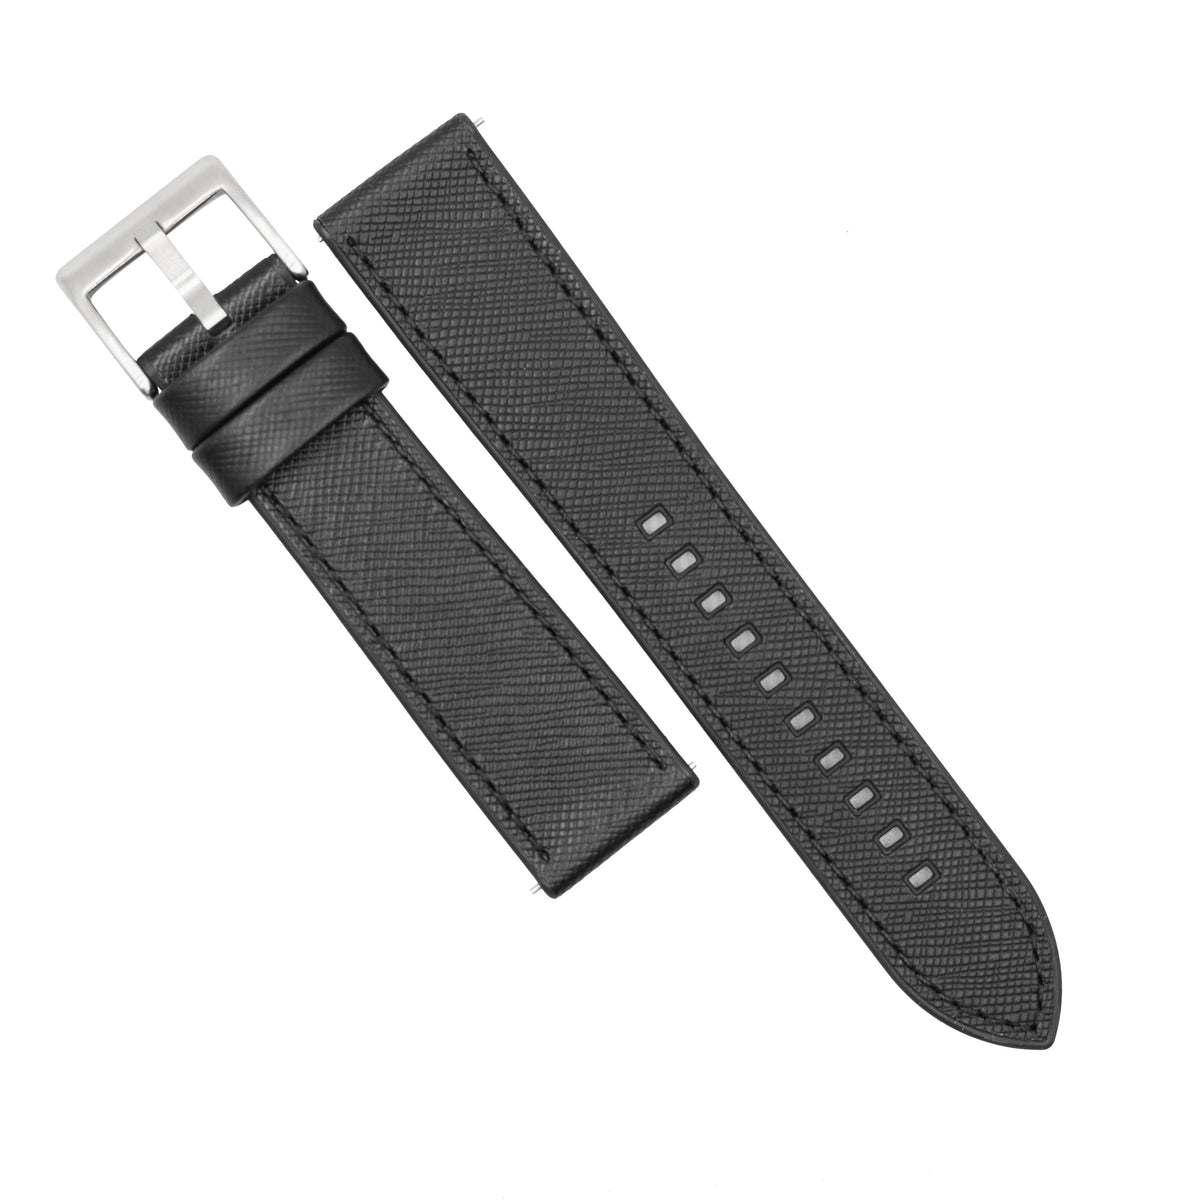 Performax Saffiano Leather FKM Rubber Hybrid Strap in Black (20mm) - Nomad Watch Works SG